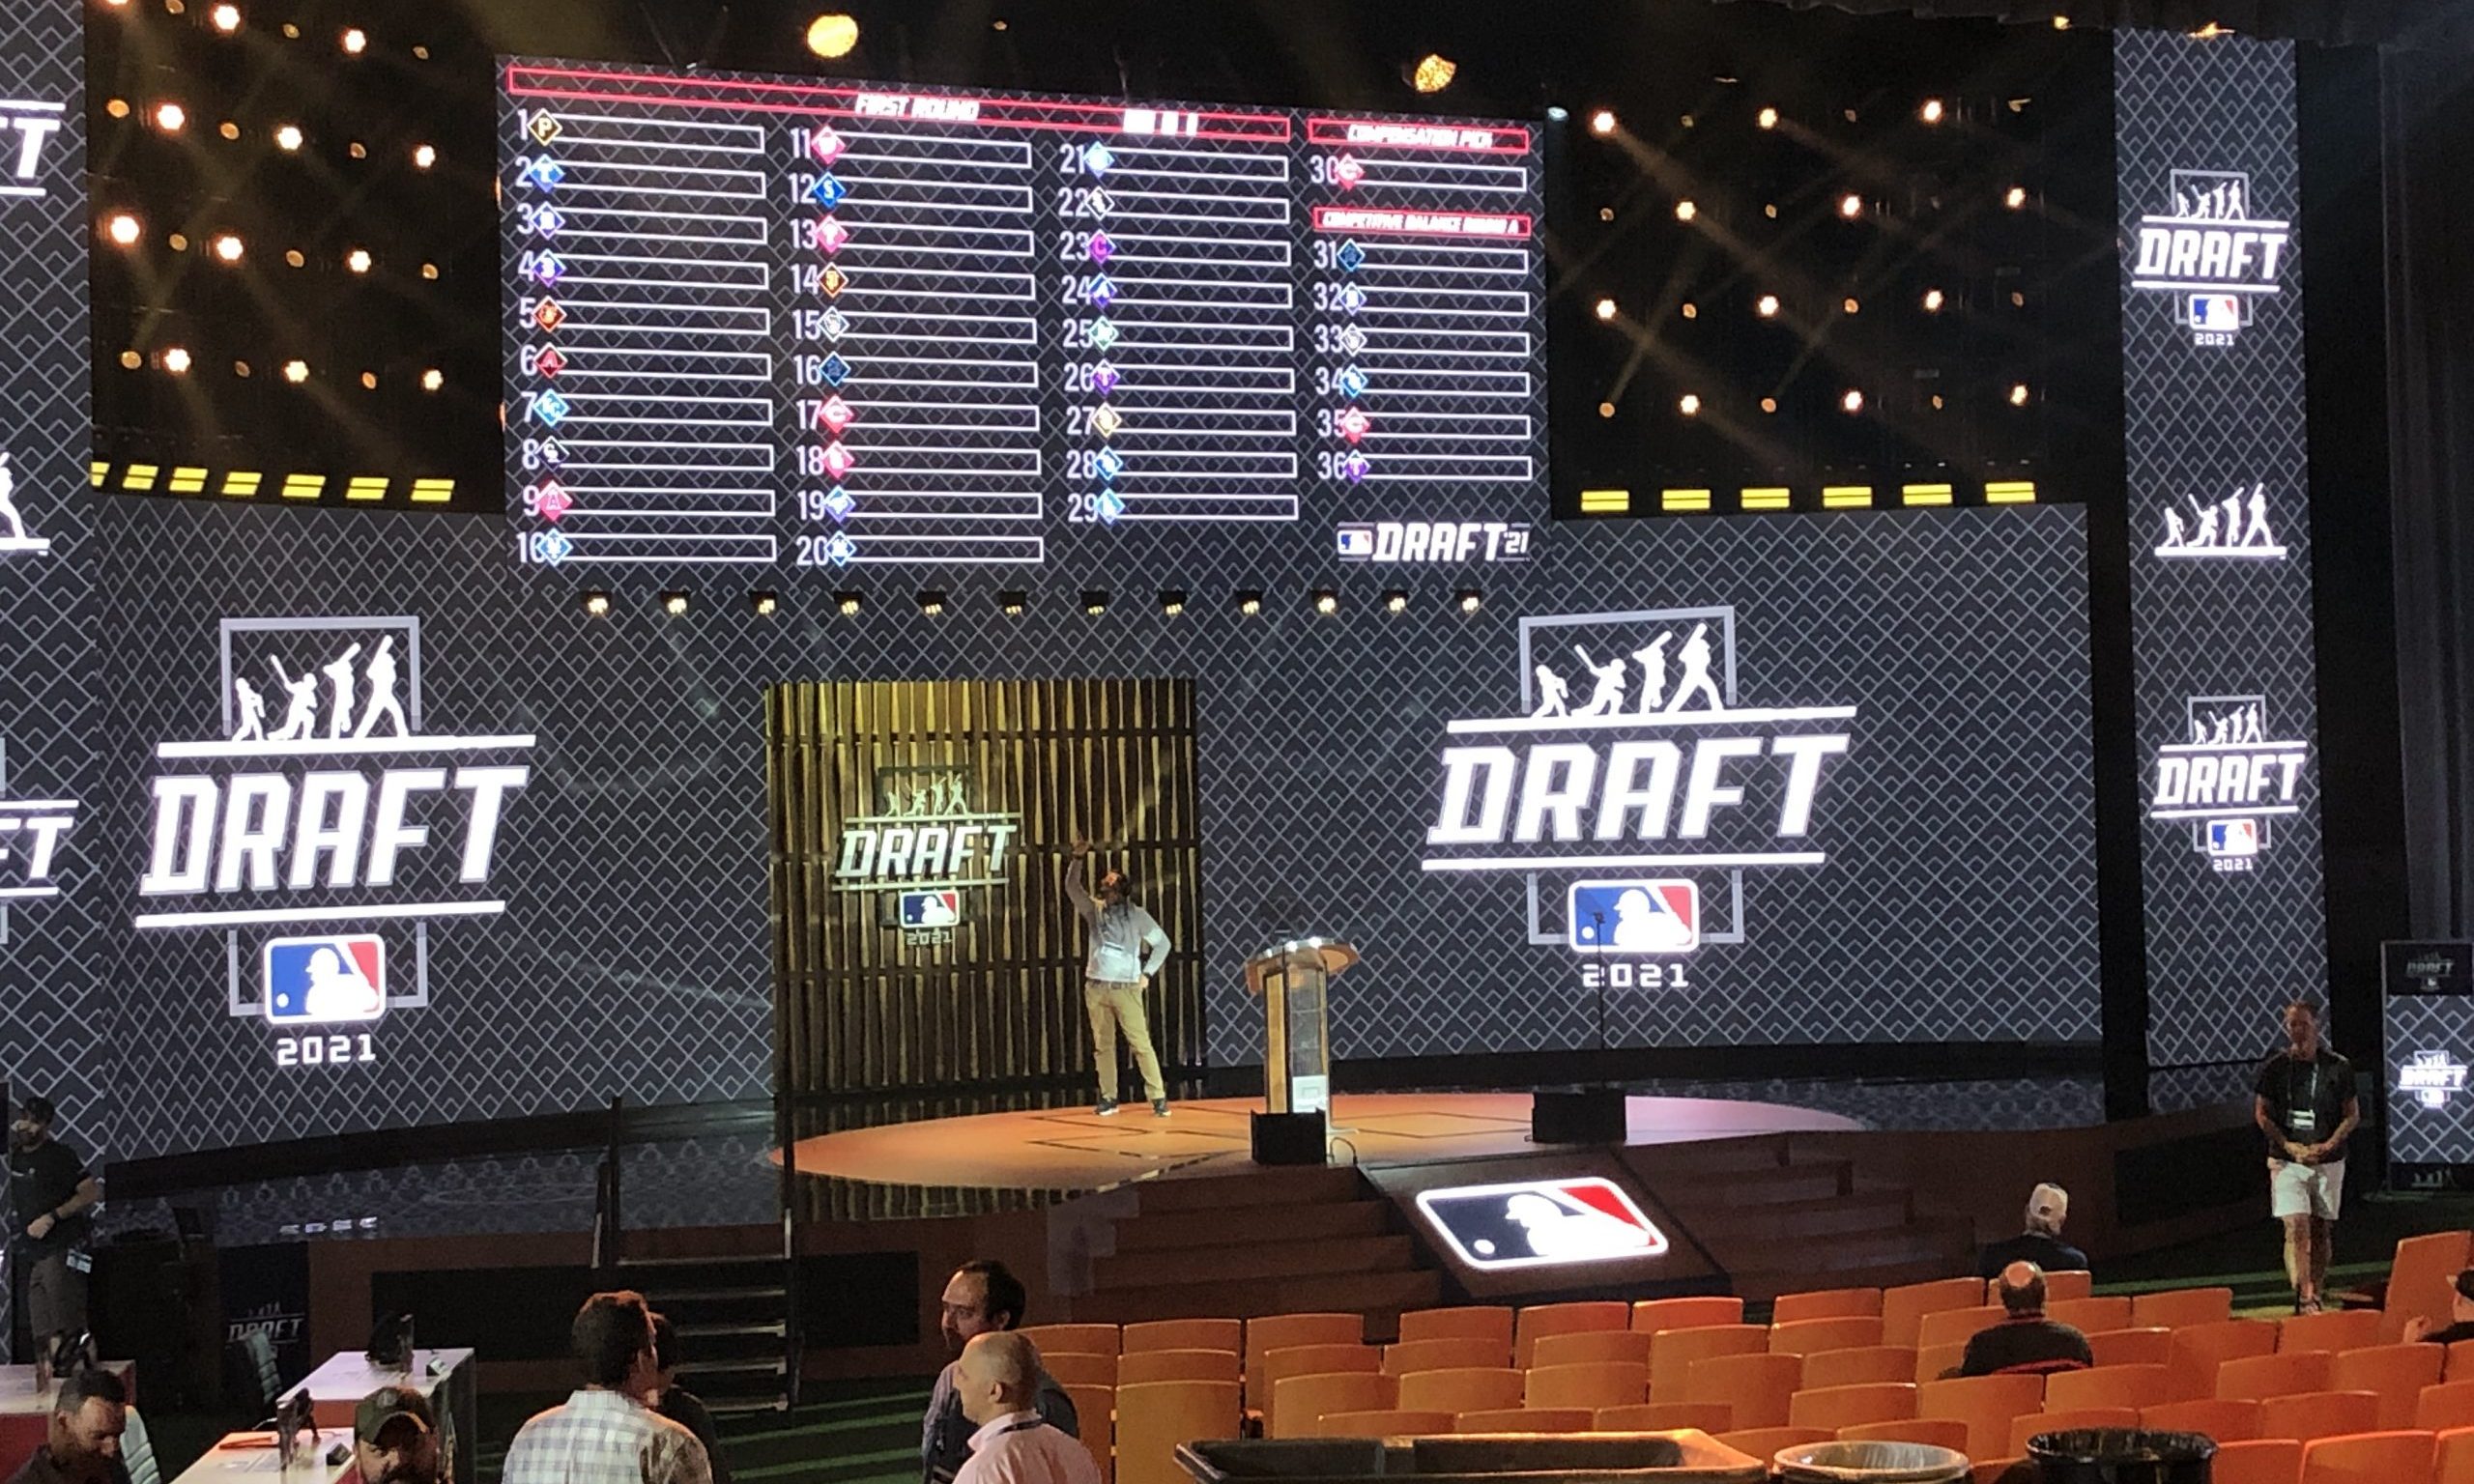 Live From MLB All-Star 2021: MLB Network Brings MLB Draft to Denver With  Onsite Operations, Remote Support in Secaucus